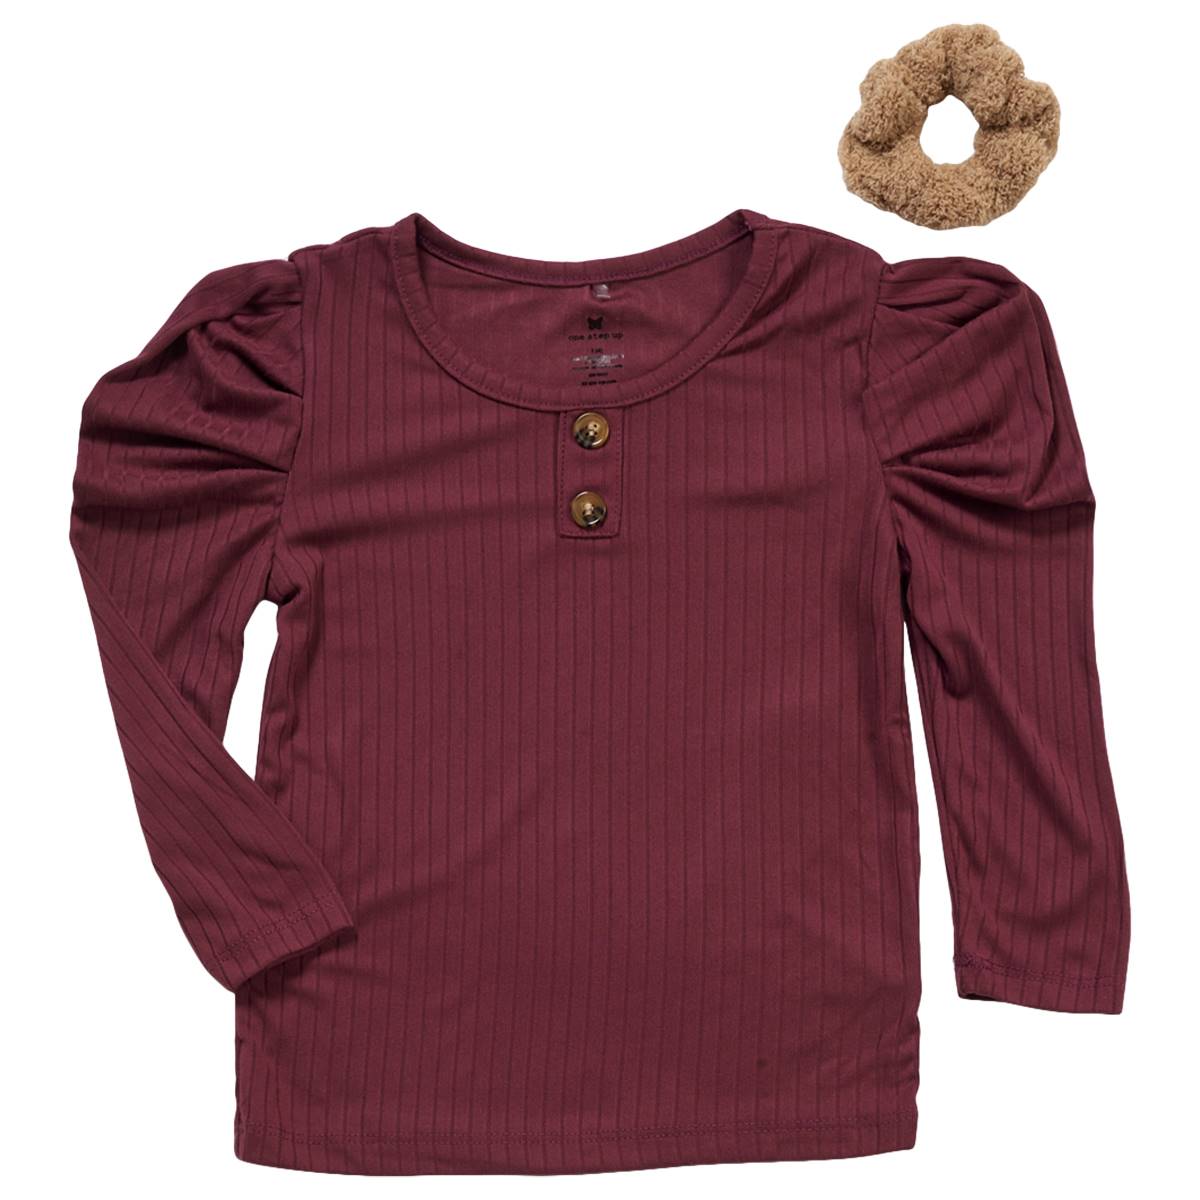 Girls (4-6x) One Step Up Solid Yummy Rib Top - Berry Rose